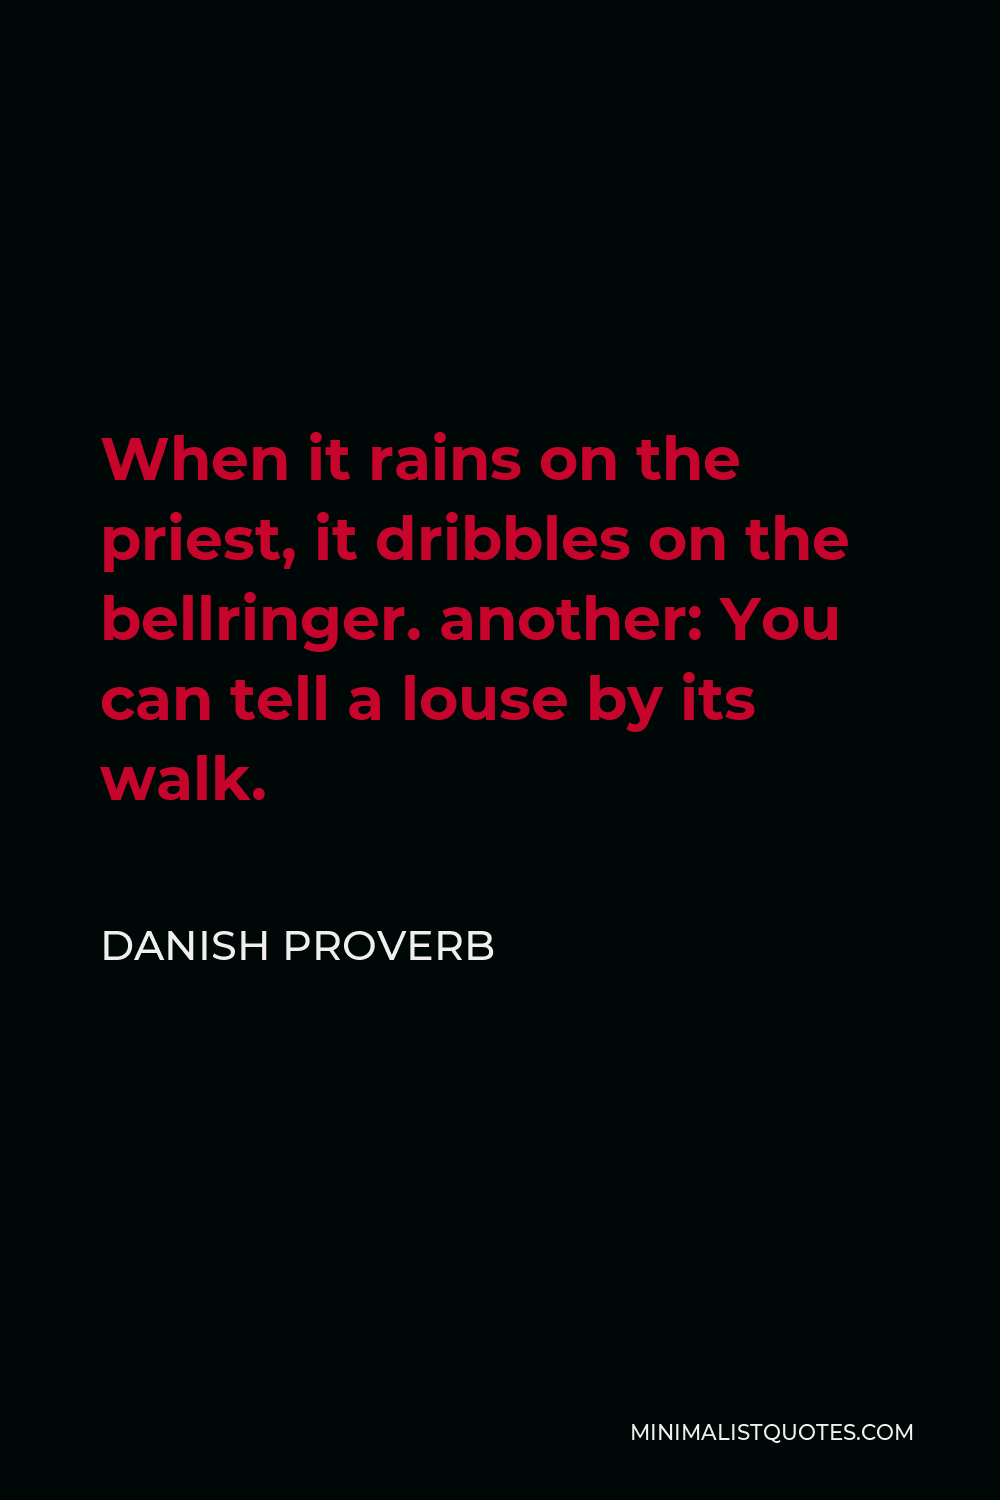 Danish Proverb Quote - When it rains on the priest, it dribbles on the bellringer. another: You can tell a louse by its walk.